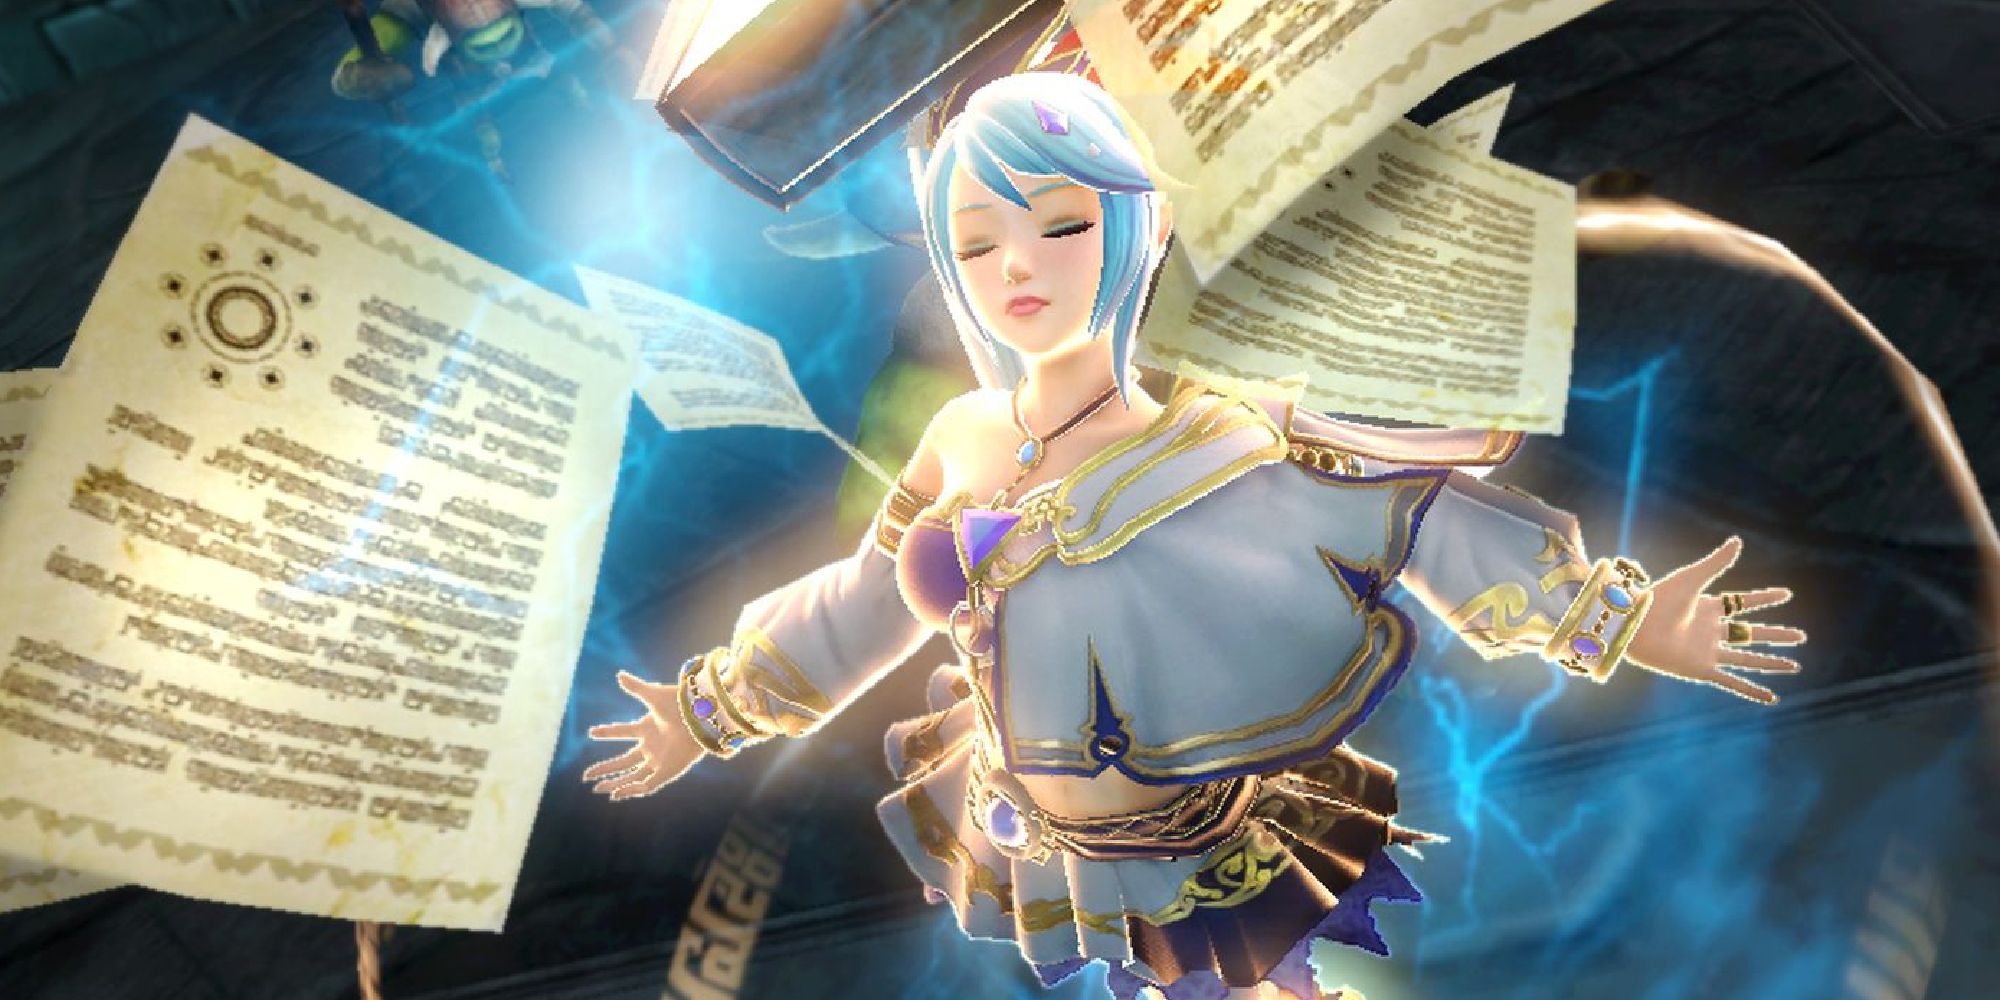 Lana casting a spell surrounded by papers in Hyrule Warriors